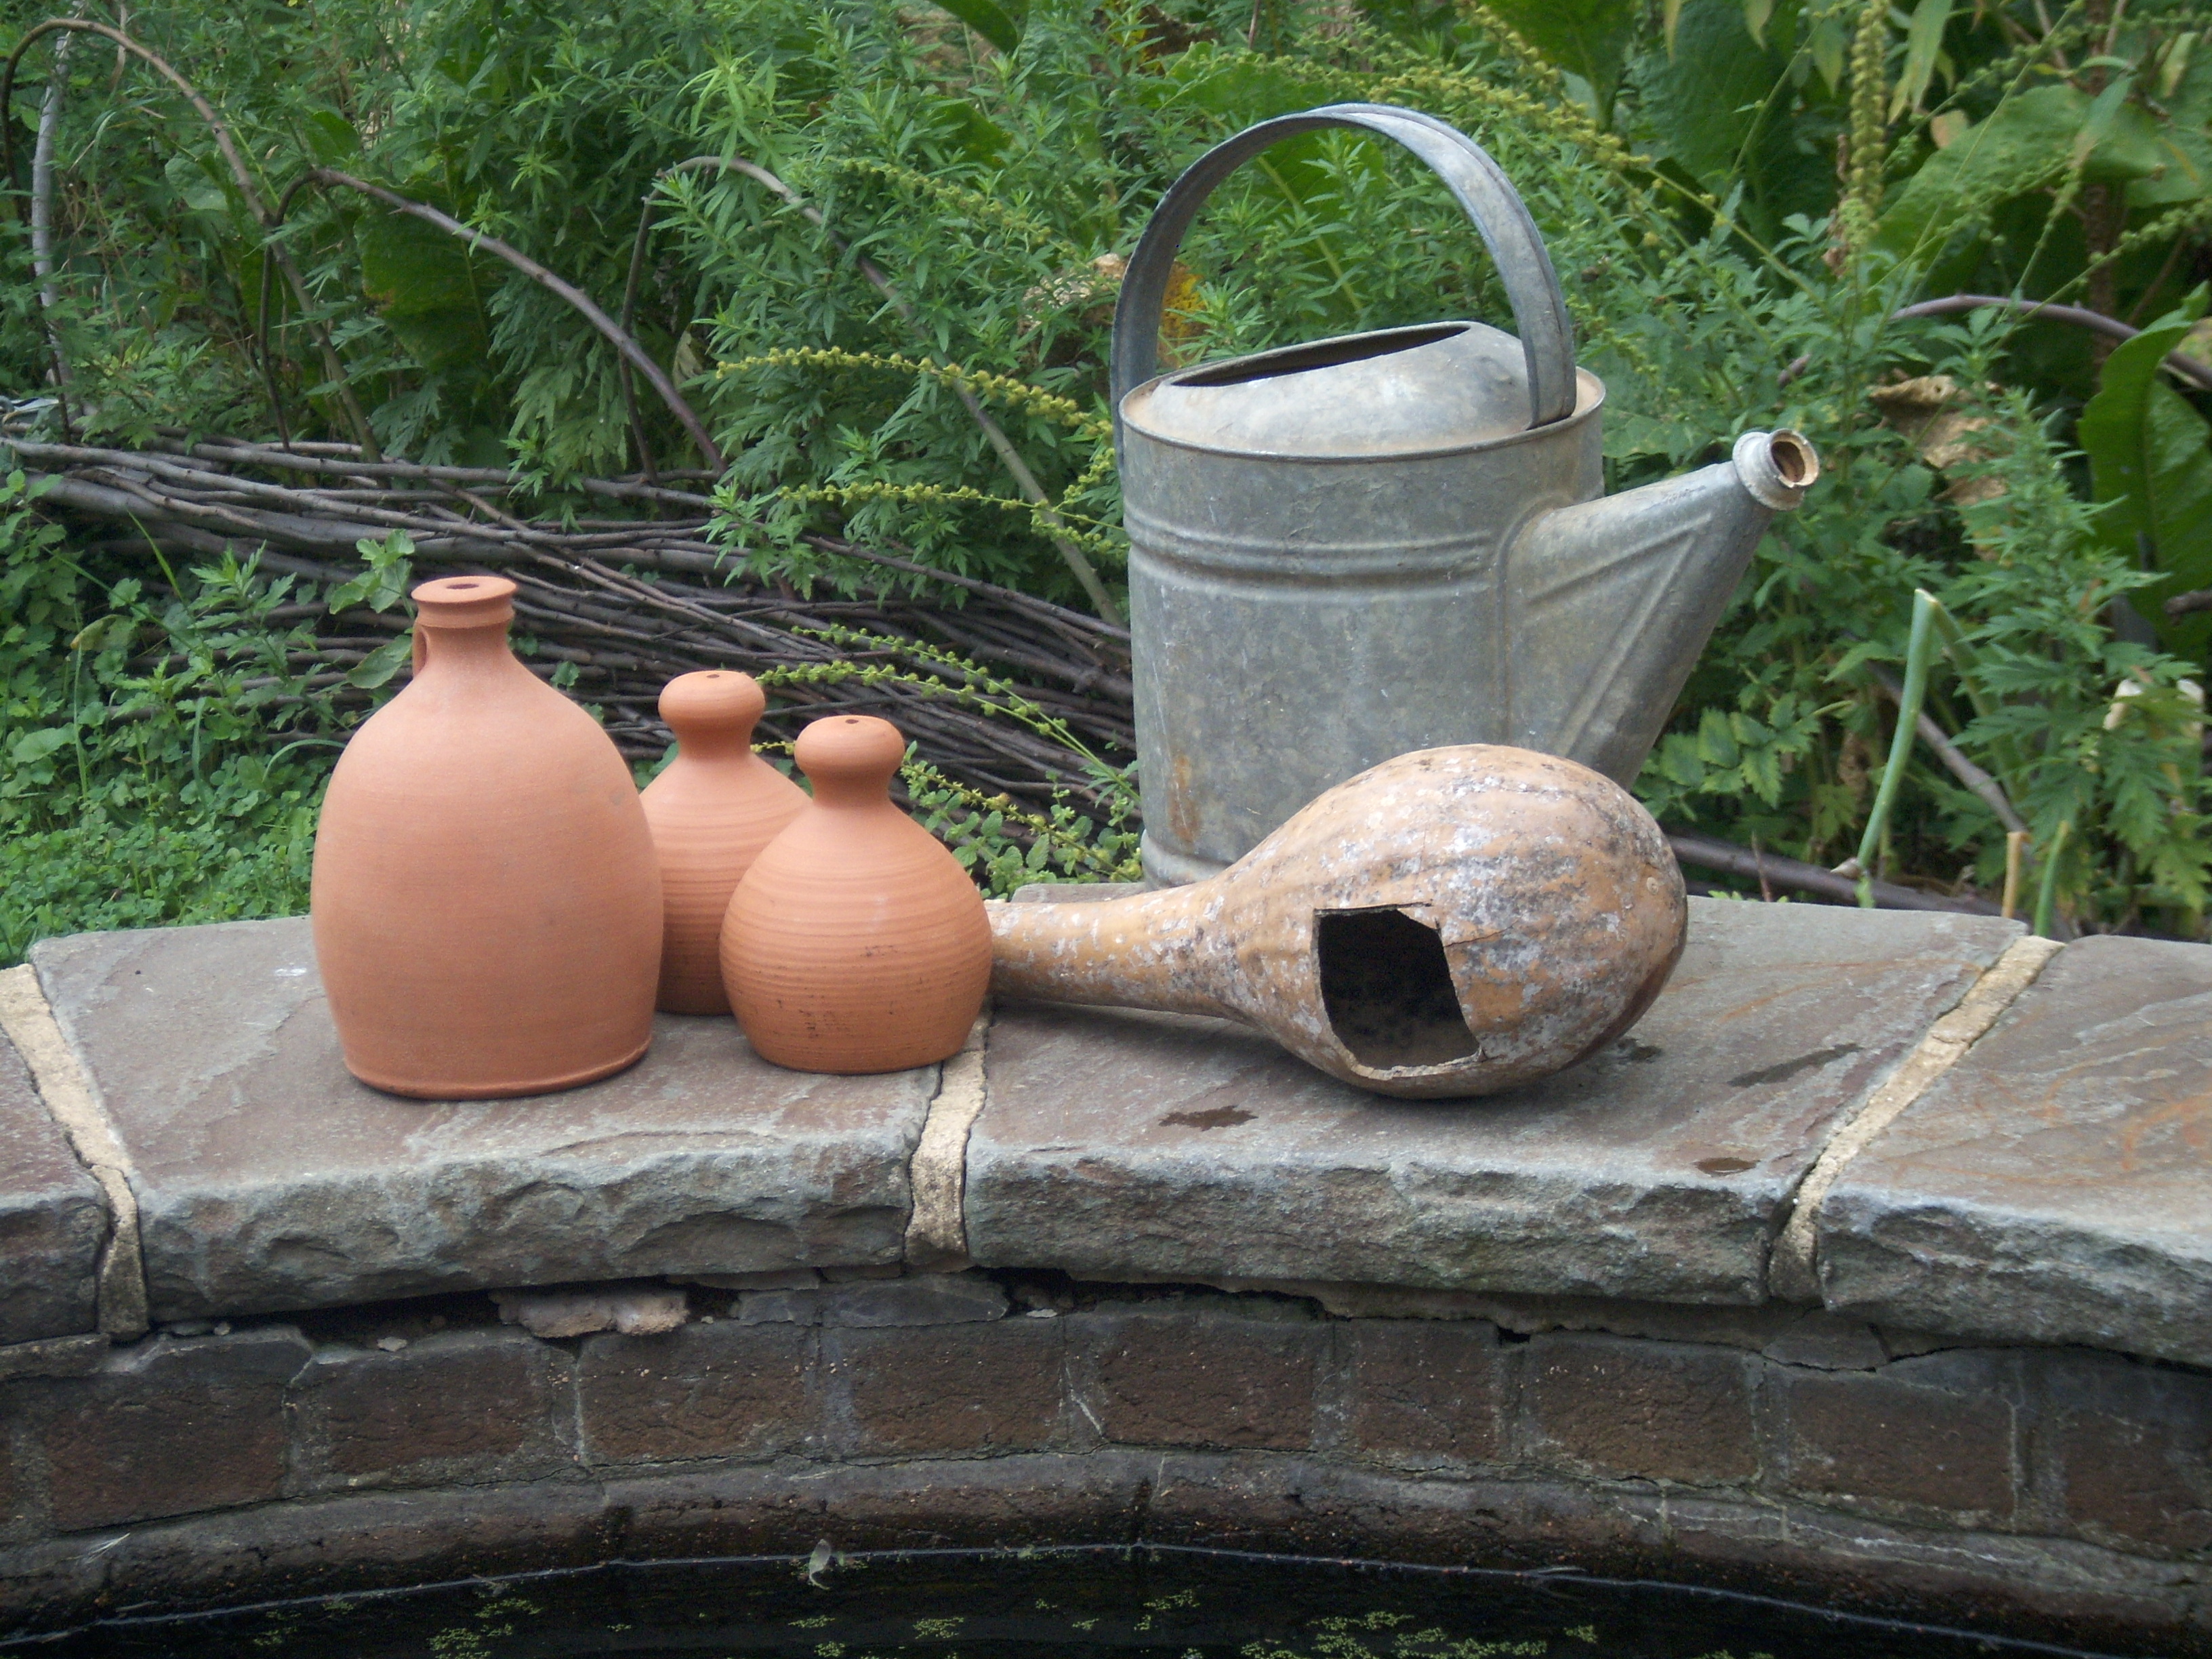 Dried gourds make excellent dippers for the cistern. Gourds and thumb-pots are favorite 17th-century tools kids can use as they water the garden's many plants.